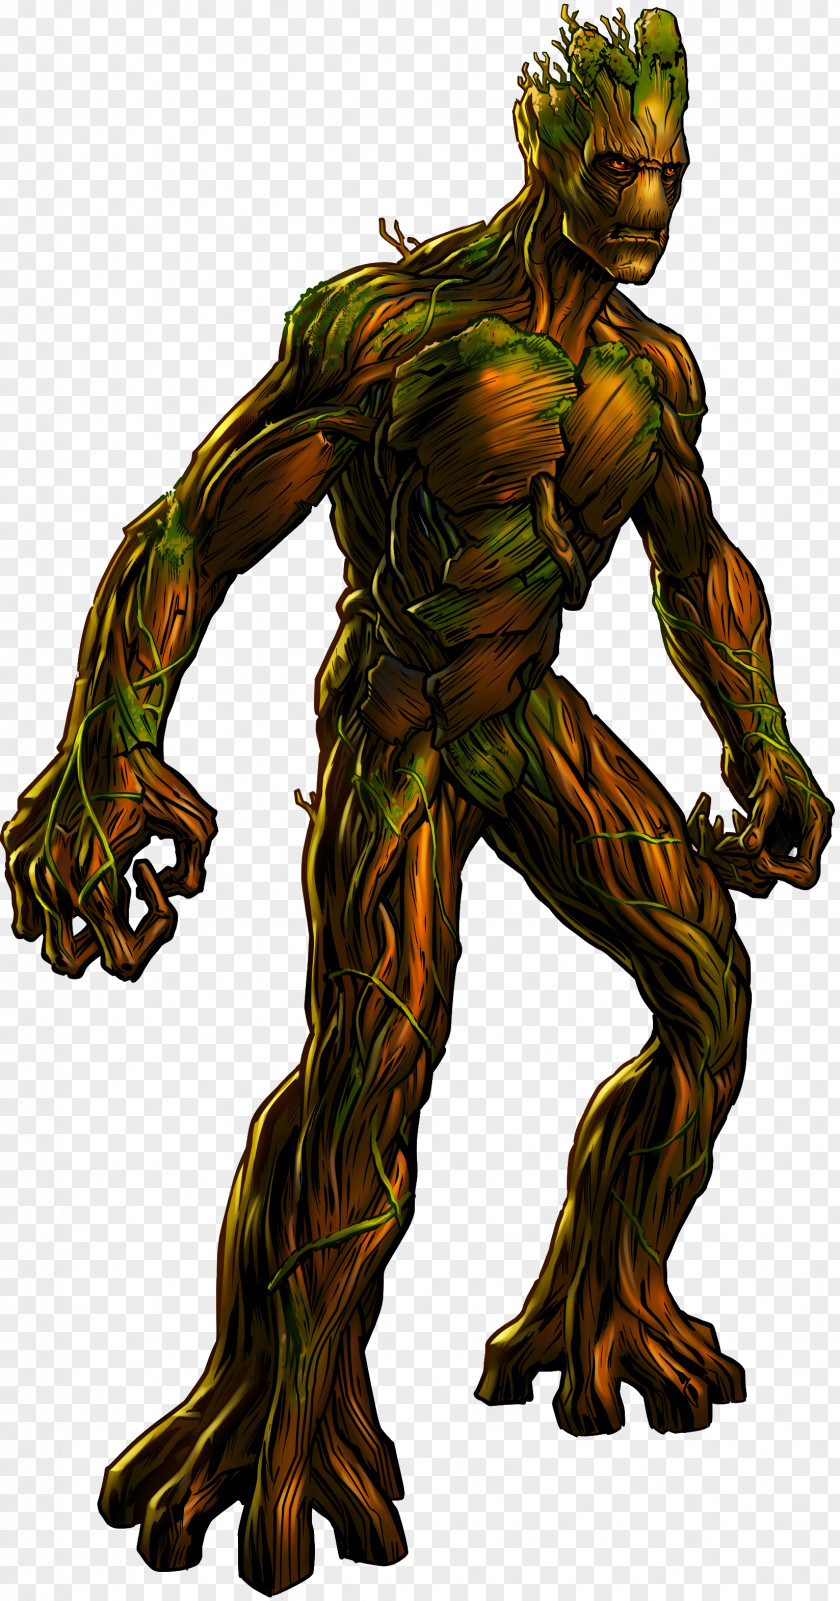 Rocket Raccoon Baby Groot Drax The Destroyer Marvel: Avengers Alliance PNG